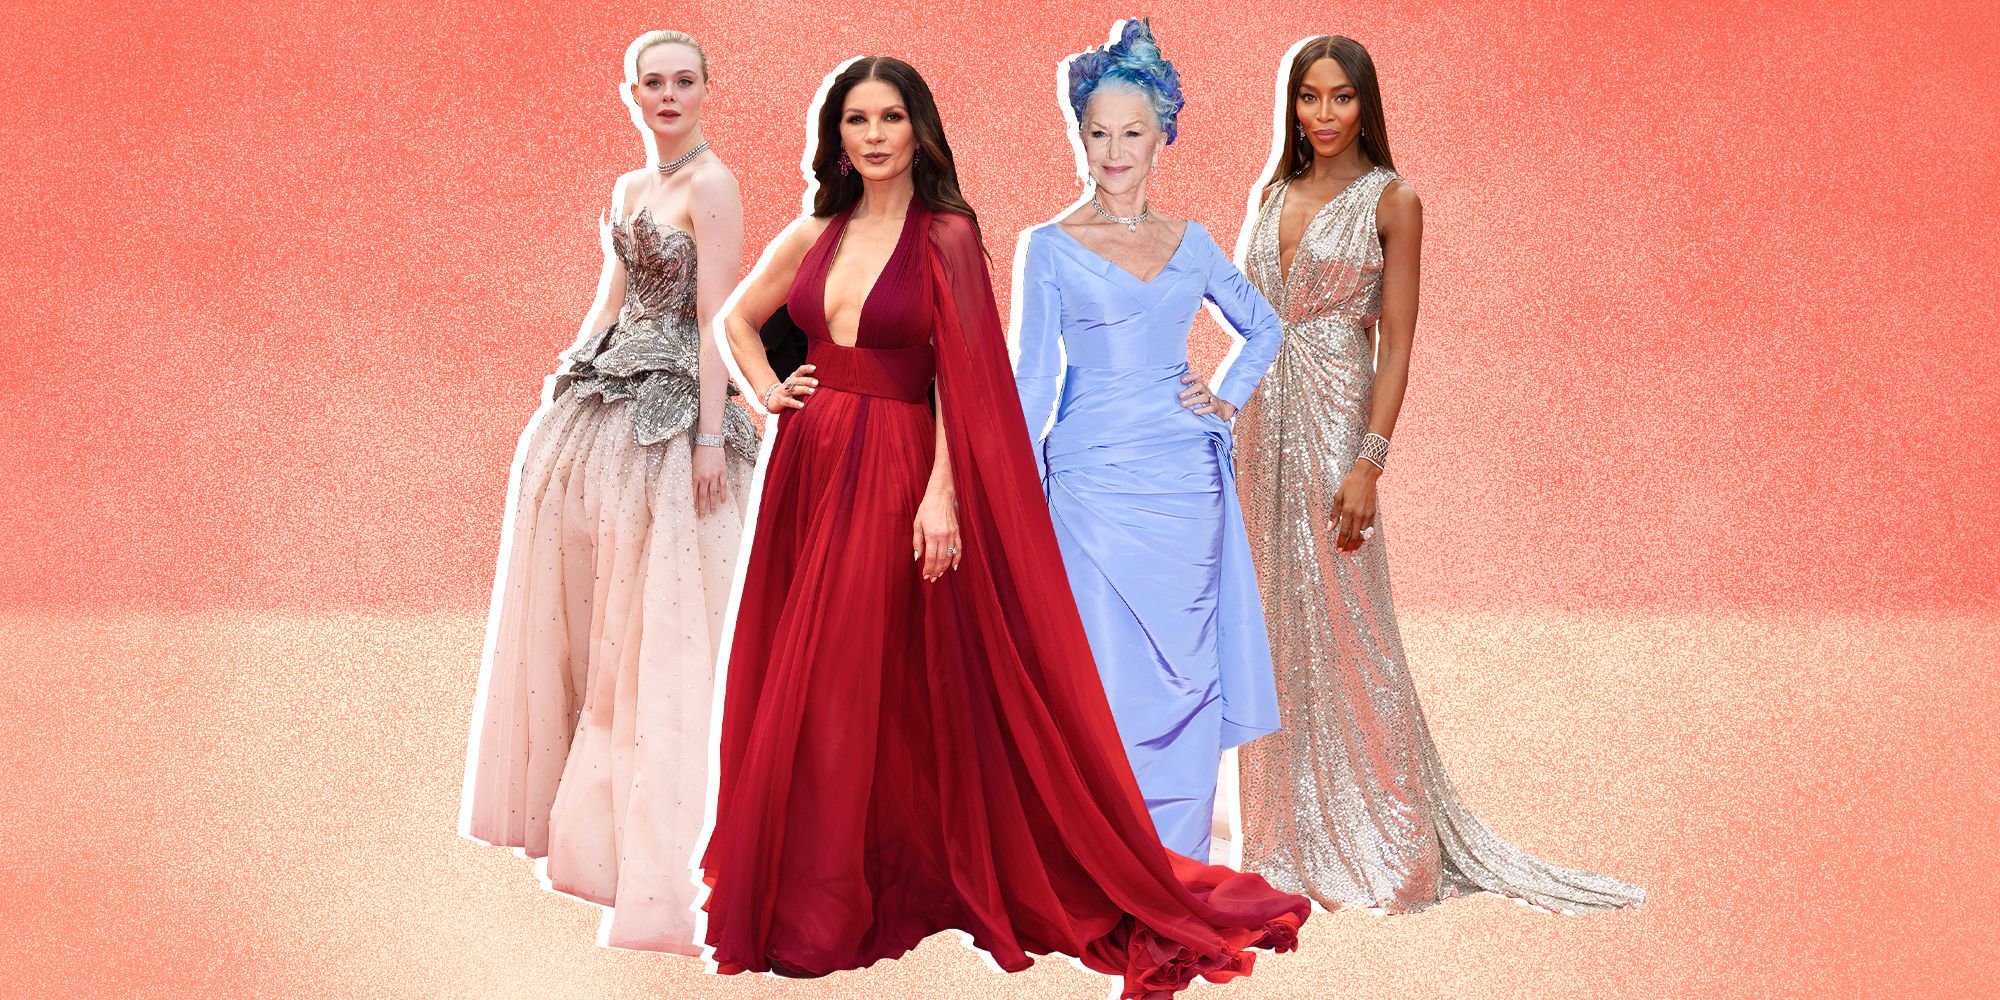 The Most Bridal Oscar Red Carpet Dresses of All Time